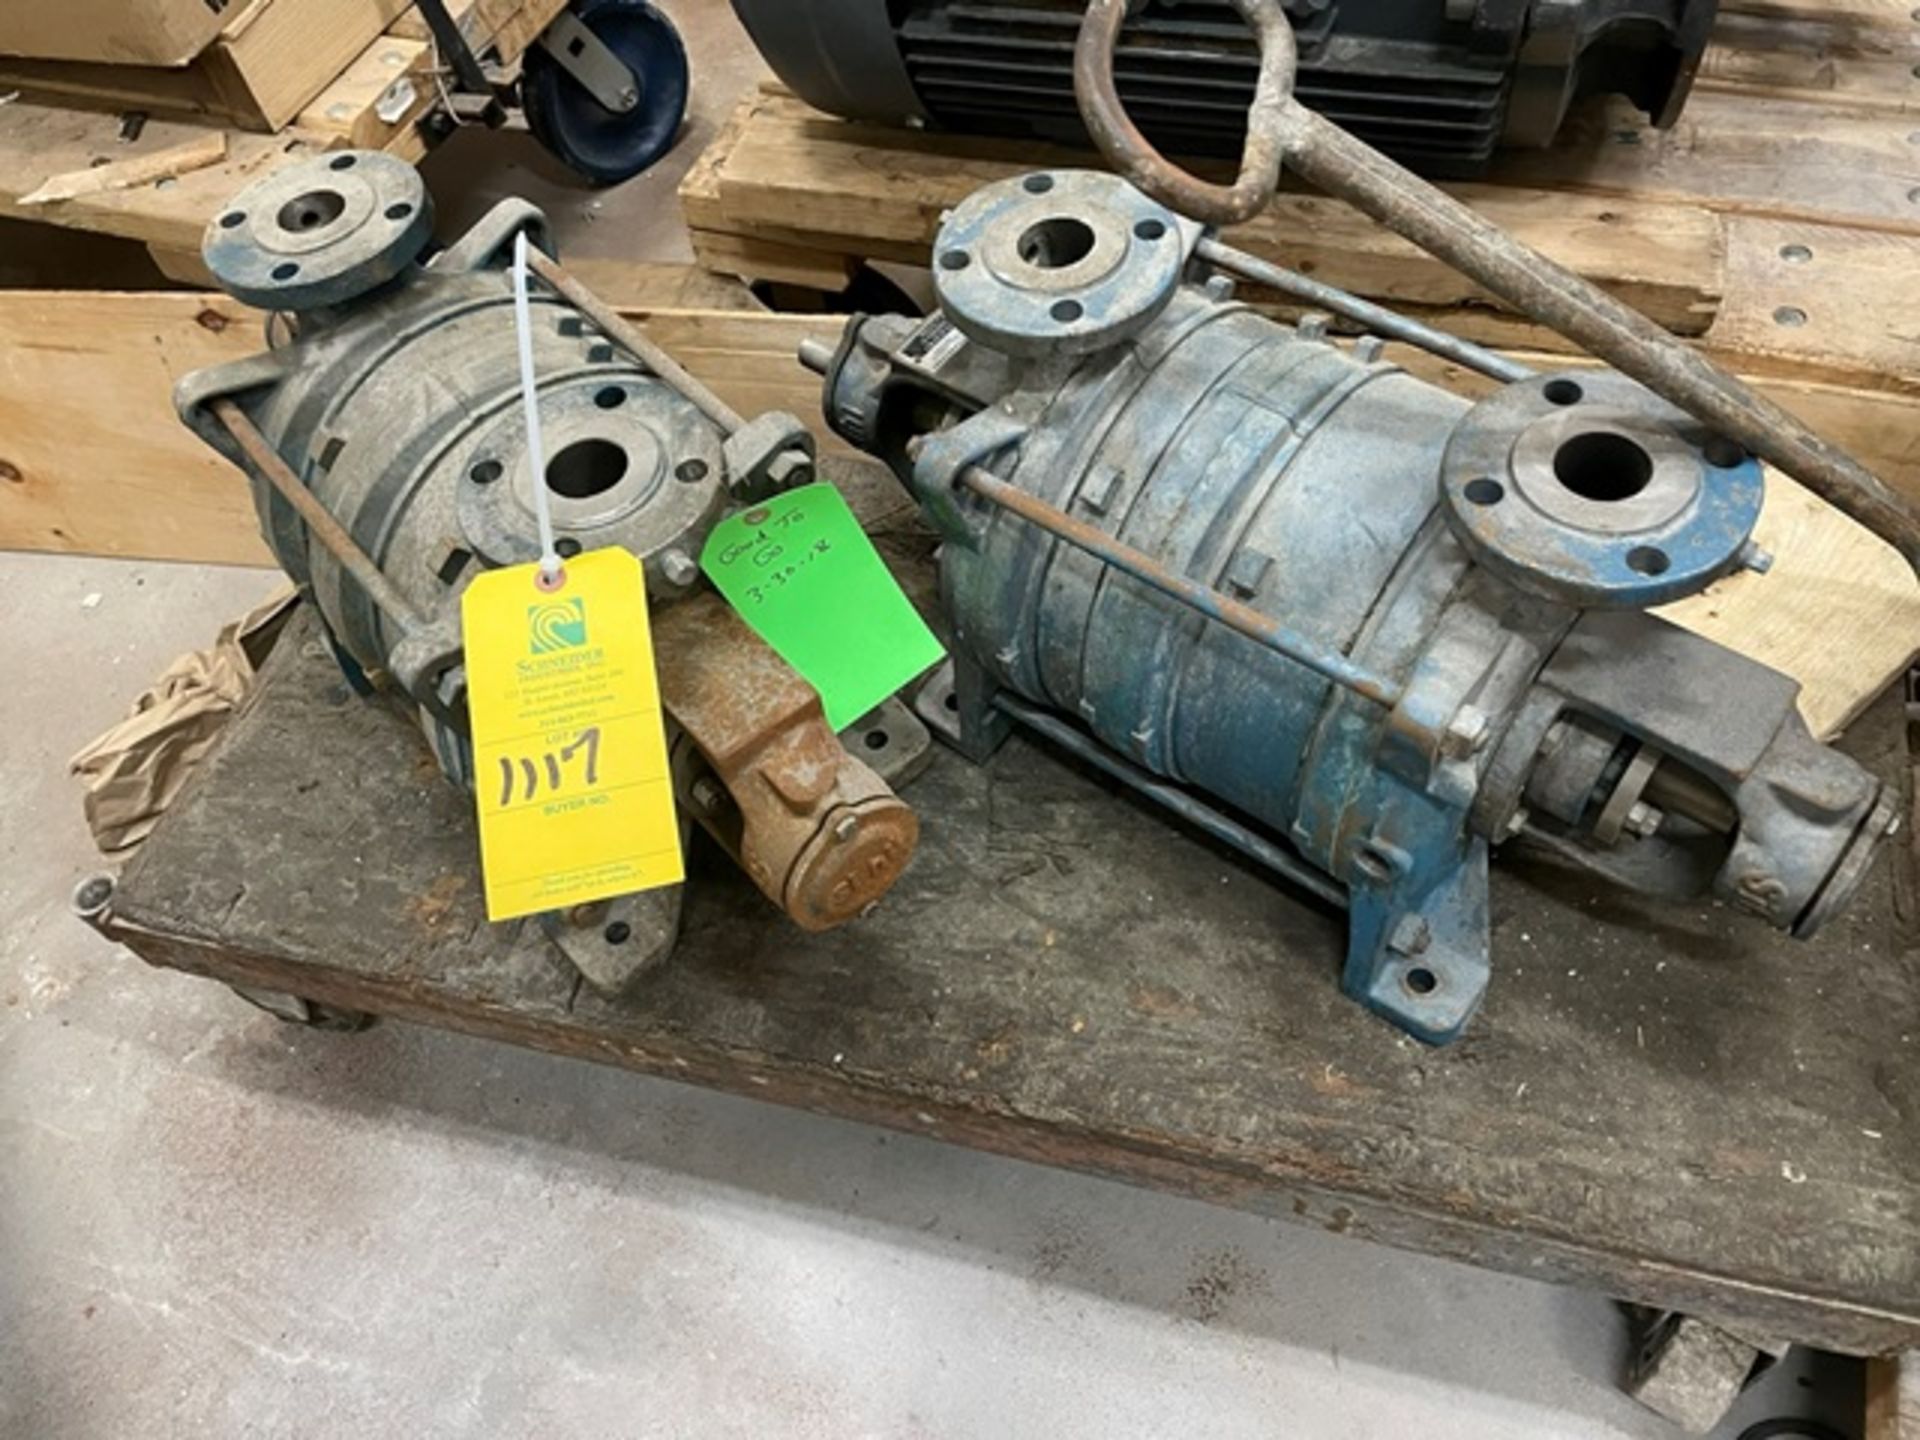 Qty. (2) SIHI Pumps, Limited Pumps, Stock 10117593, Rigging & Loading Fee: $150